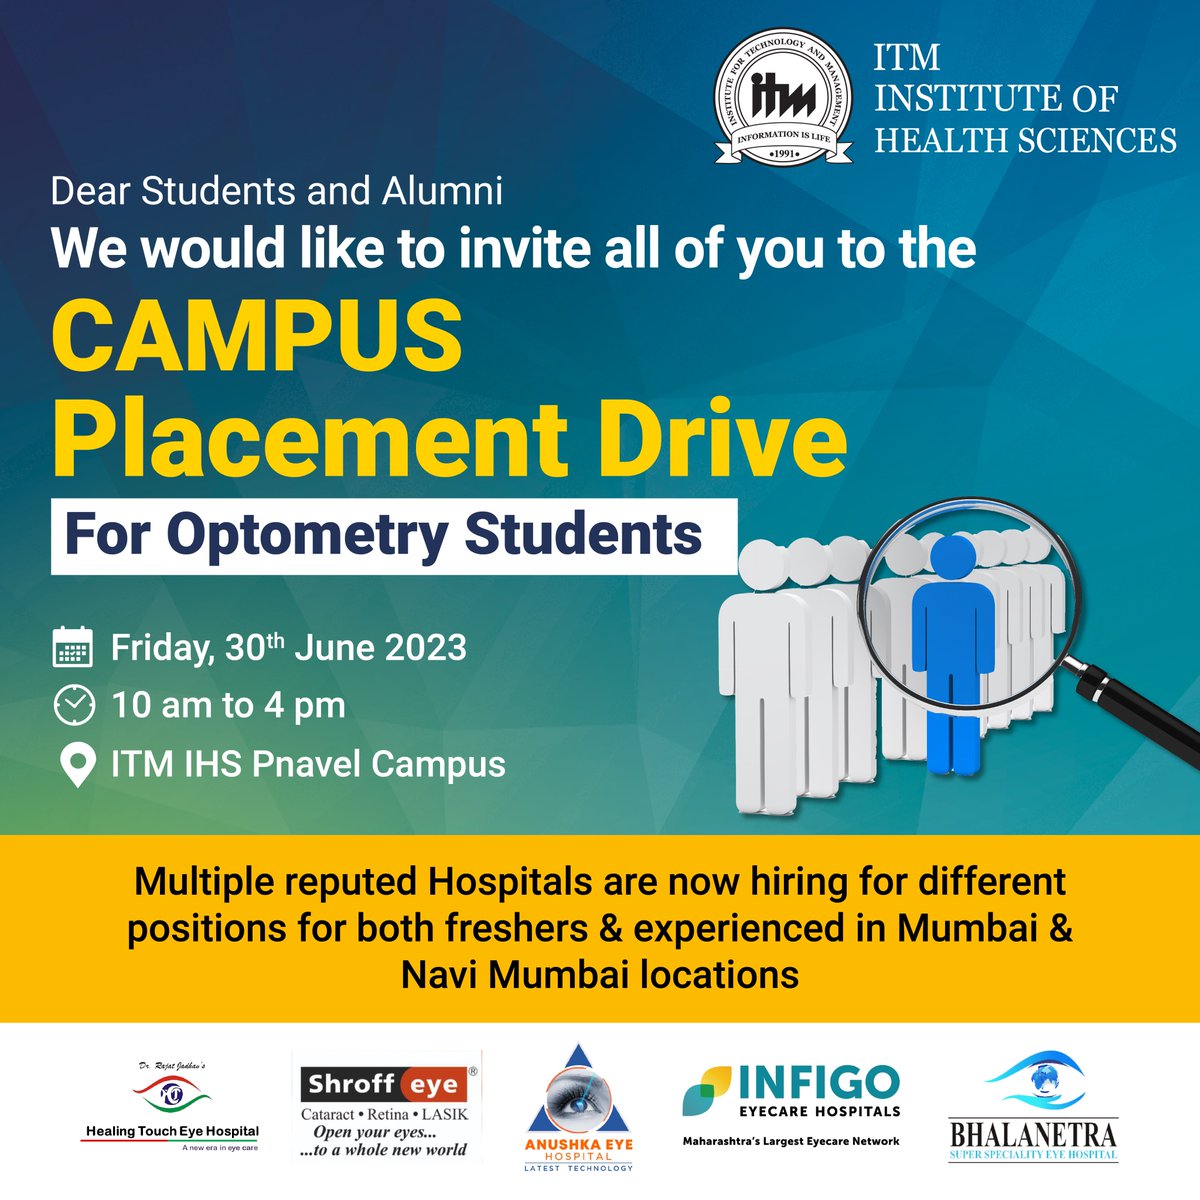 Unlock Your Future: Join Our Placement Drive!
.
.
.
.
#iamitm #itmihs #placementdrive #students #placement #future #optometry #multiplecompanies #hospital #science #healthscience #hiring #experienced #freshers #healthcare #campusplacement #alumni #interview